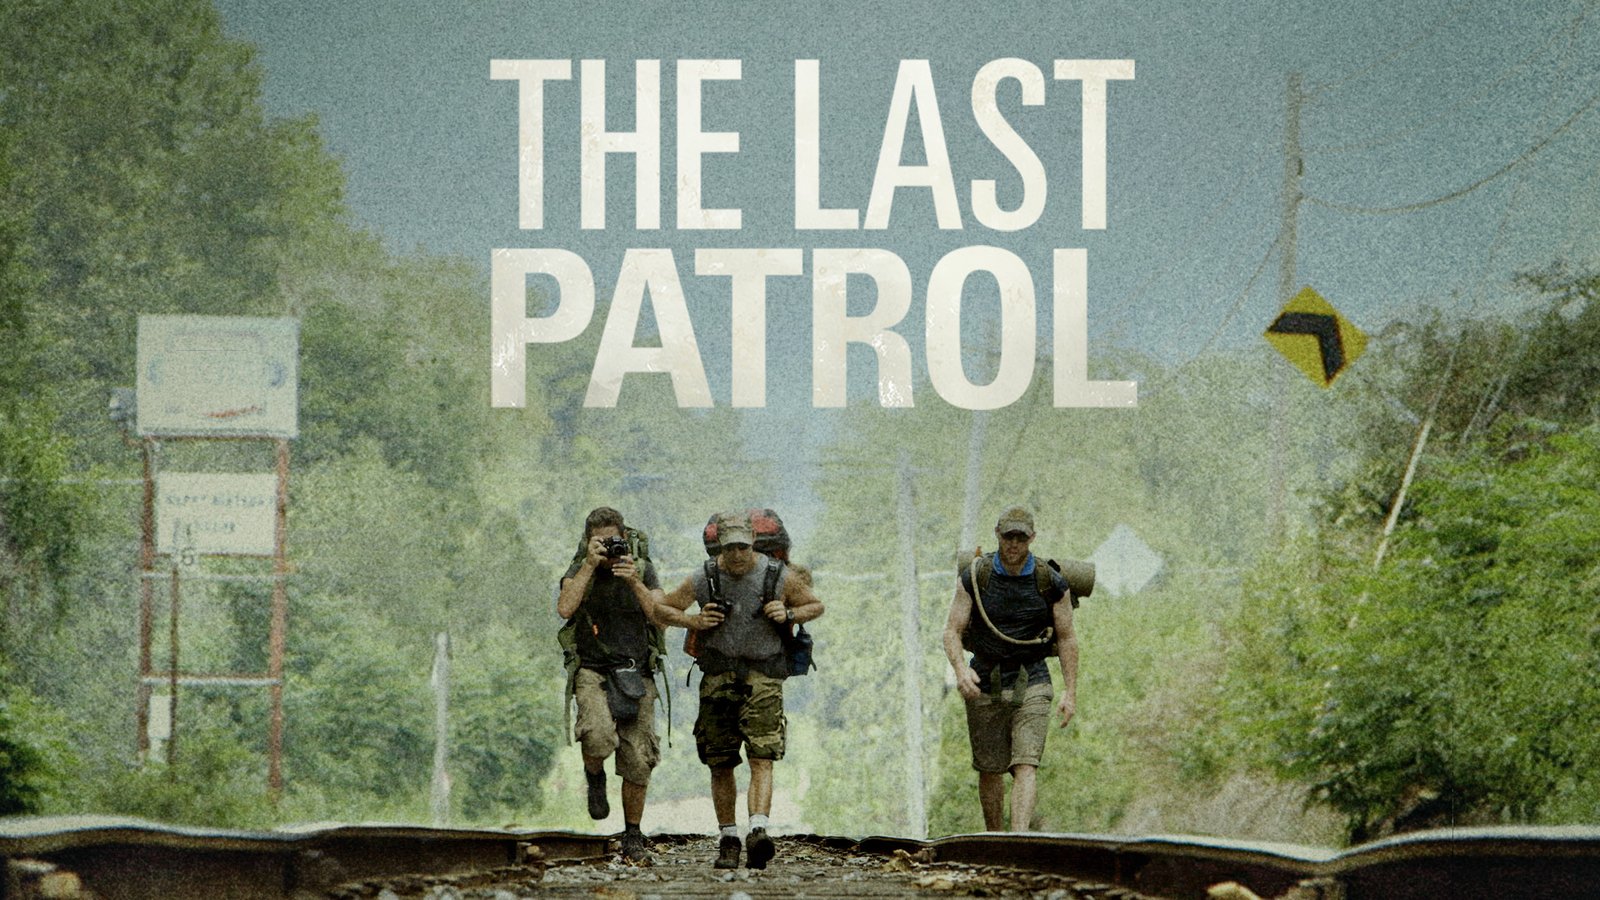 The Last Patrol - The Meditation on Coming Home from War